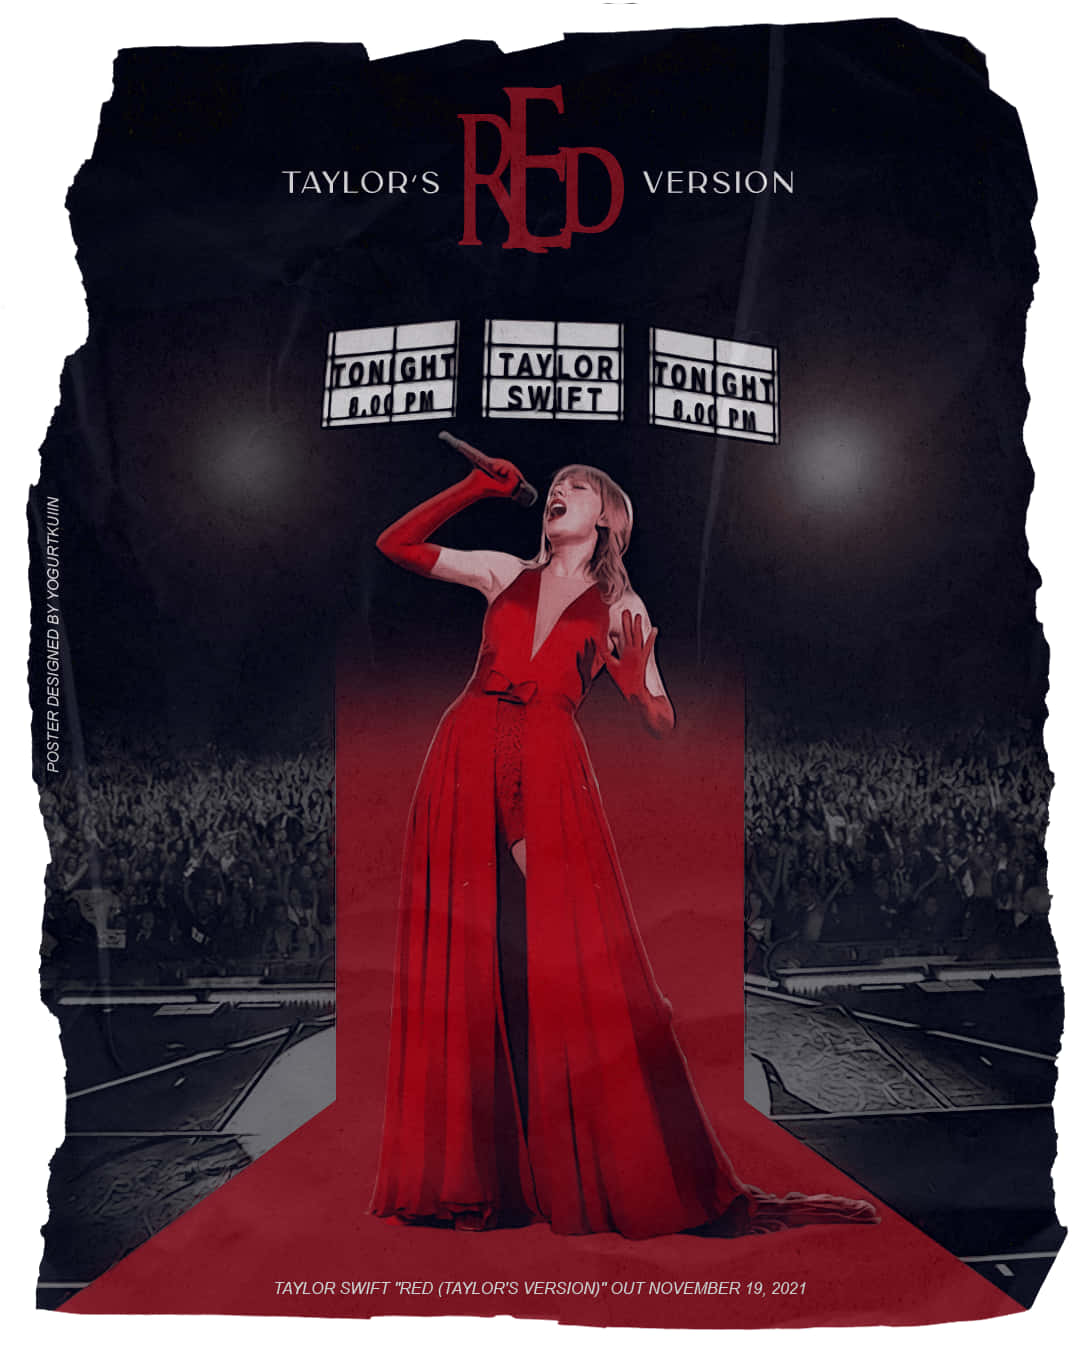 Red Taylors Version Performance Poster Wallpaper